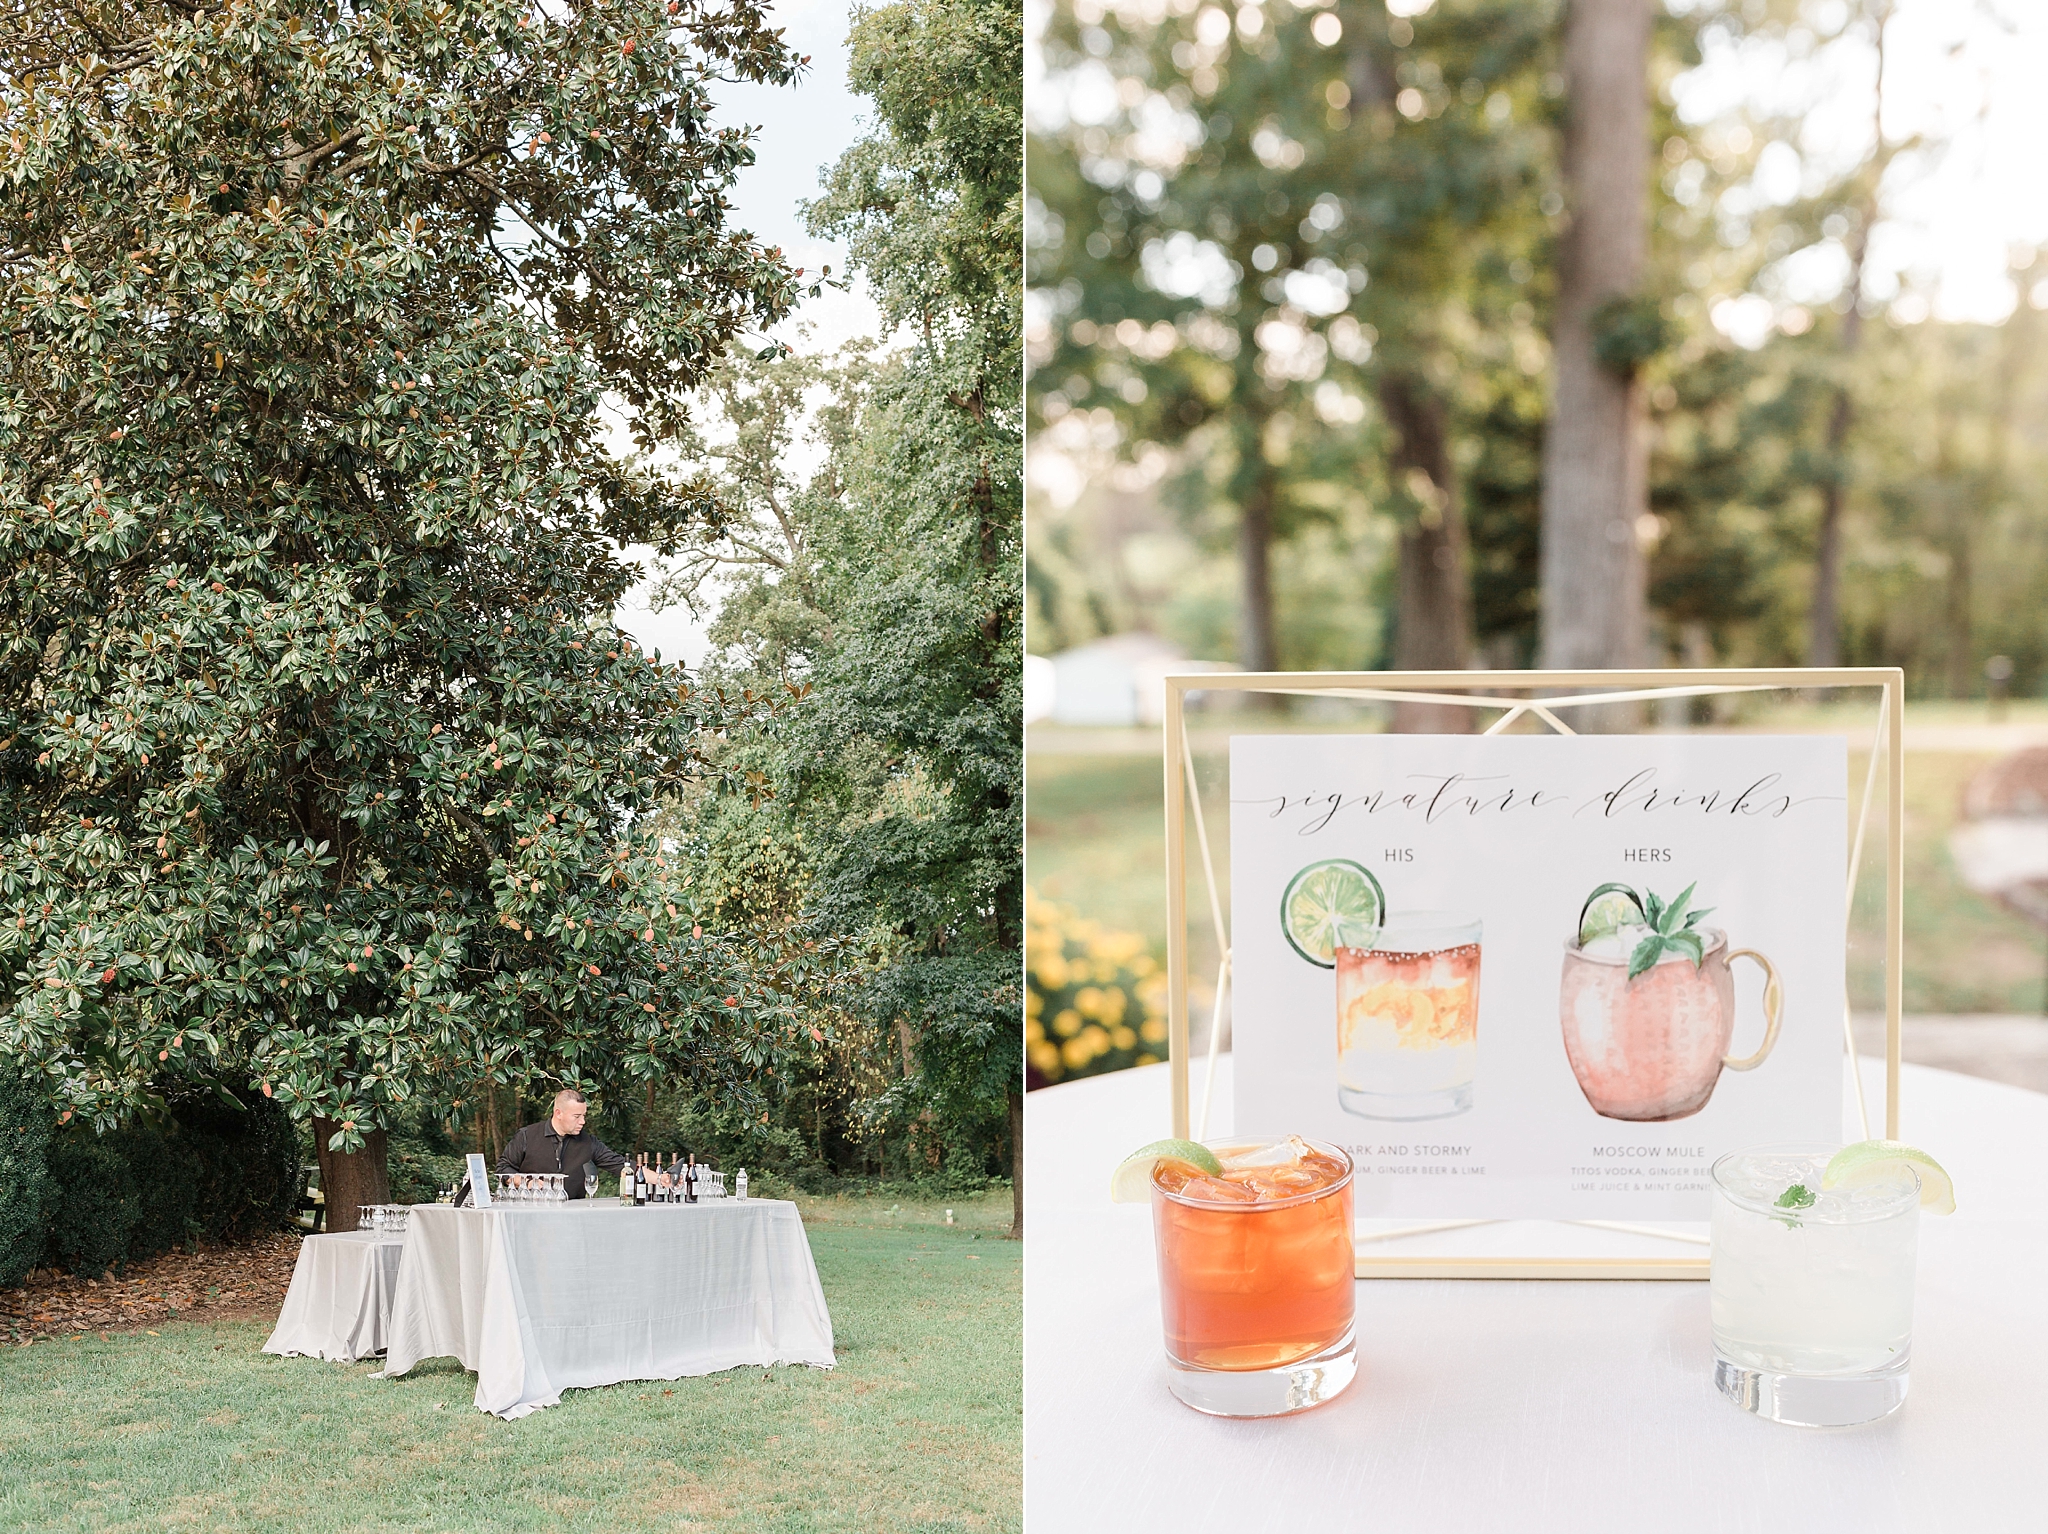 A chic and elegant wedding at The Rust Manor House in Leesburg, VA is full of handmade touches including a custom bar, dance floor, and hand-painted signage! 